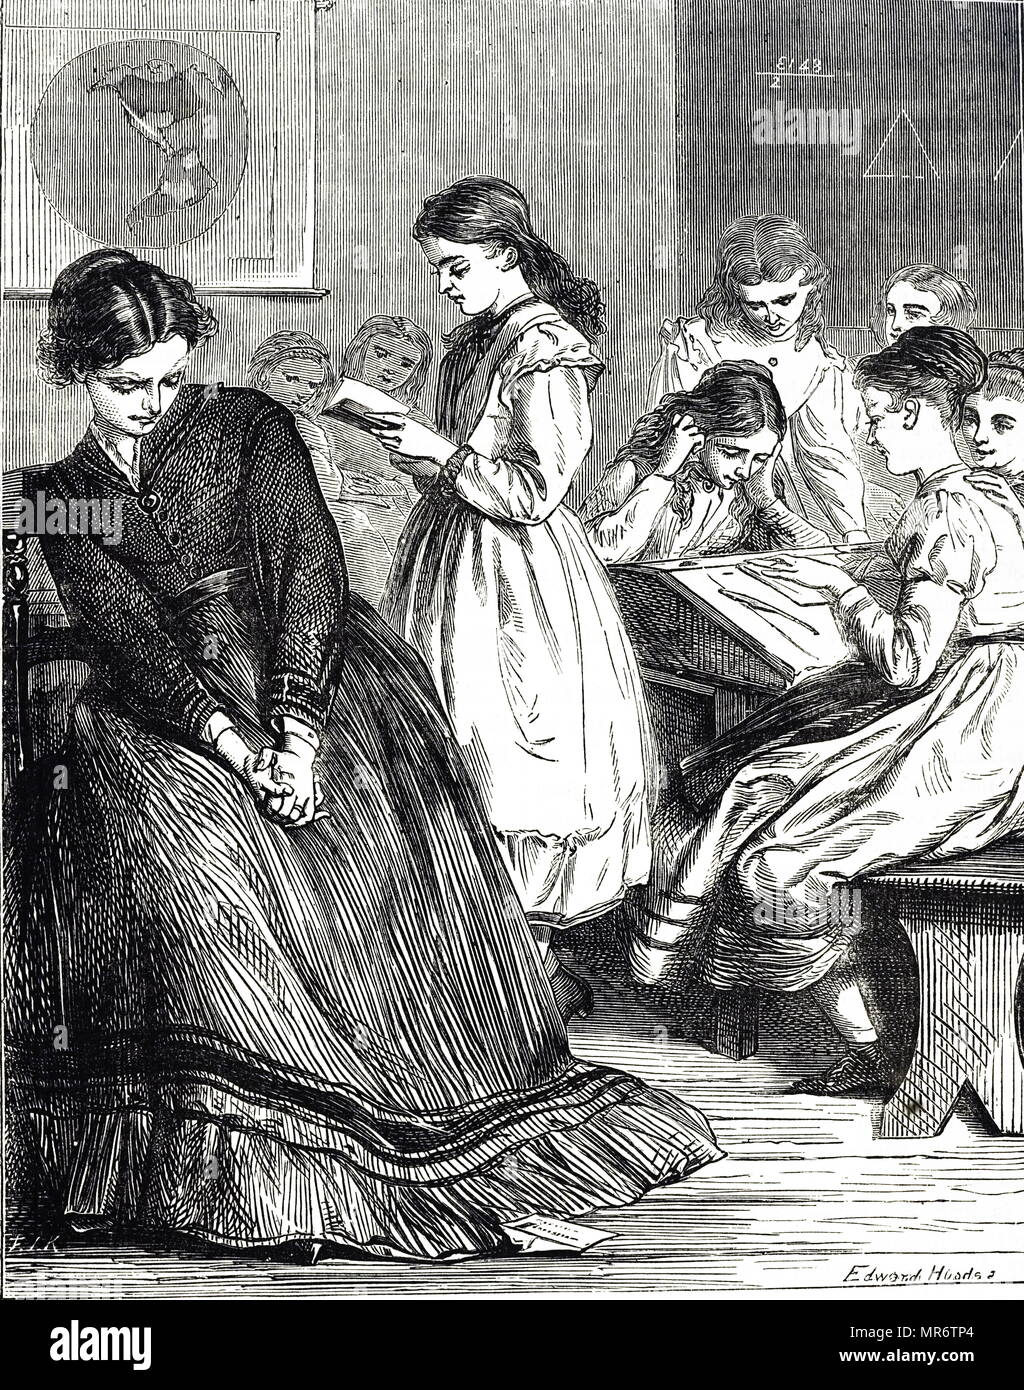 Engraving depicting an unwilling school mistress, forced into her situation because it was one of the few ways a young lady could earn a living. Illustrated Edward Hughes (1832-1908) a British artist. Dated 19th century Stock Photo